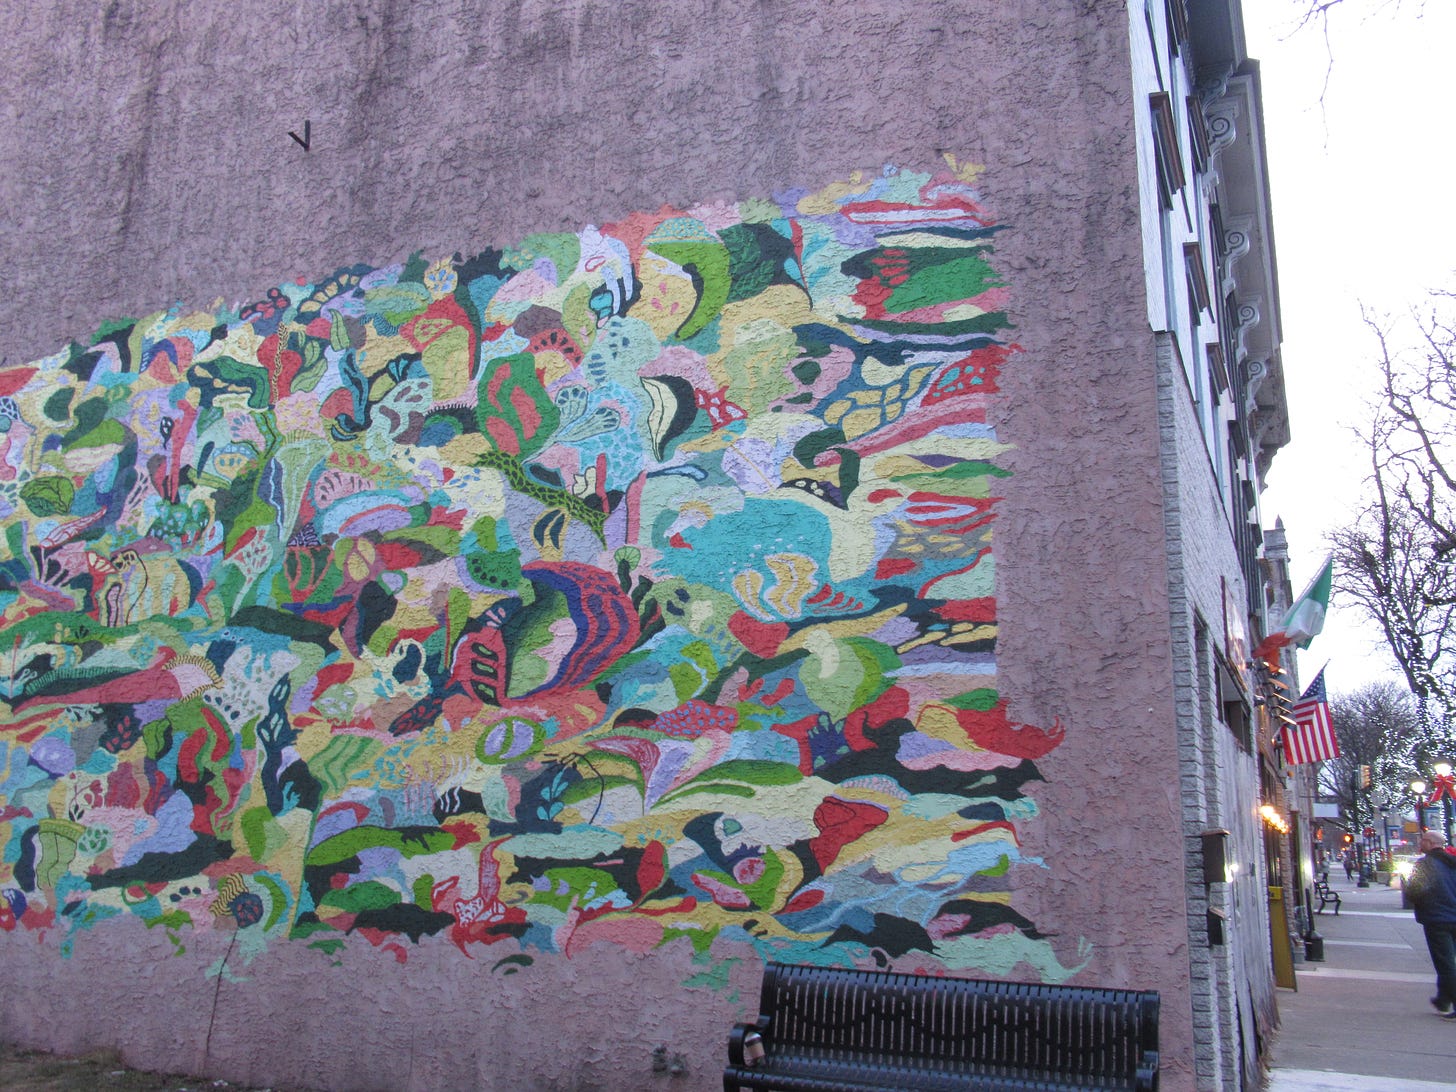 A colorful abstract art street mural on the side of a building in the old downtown of a northeaster Pennsylvania town